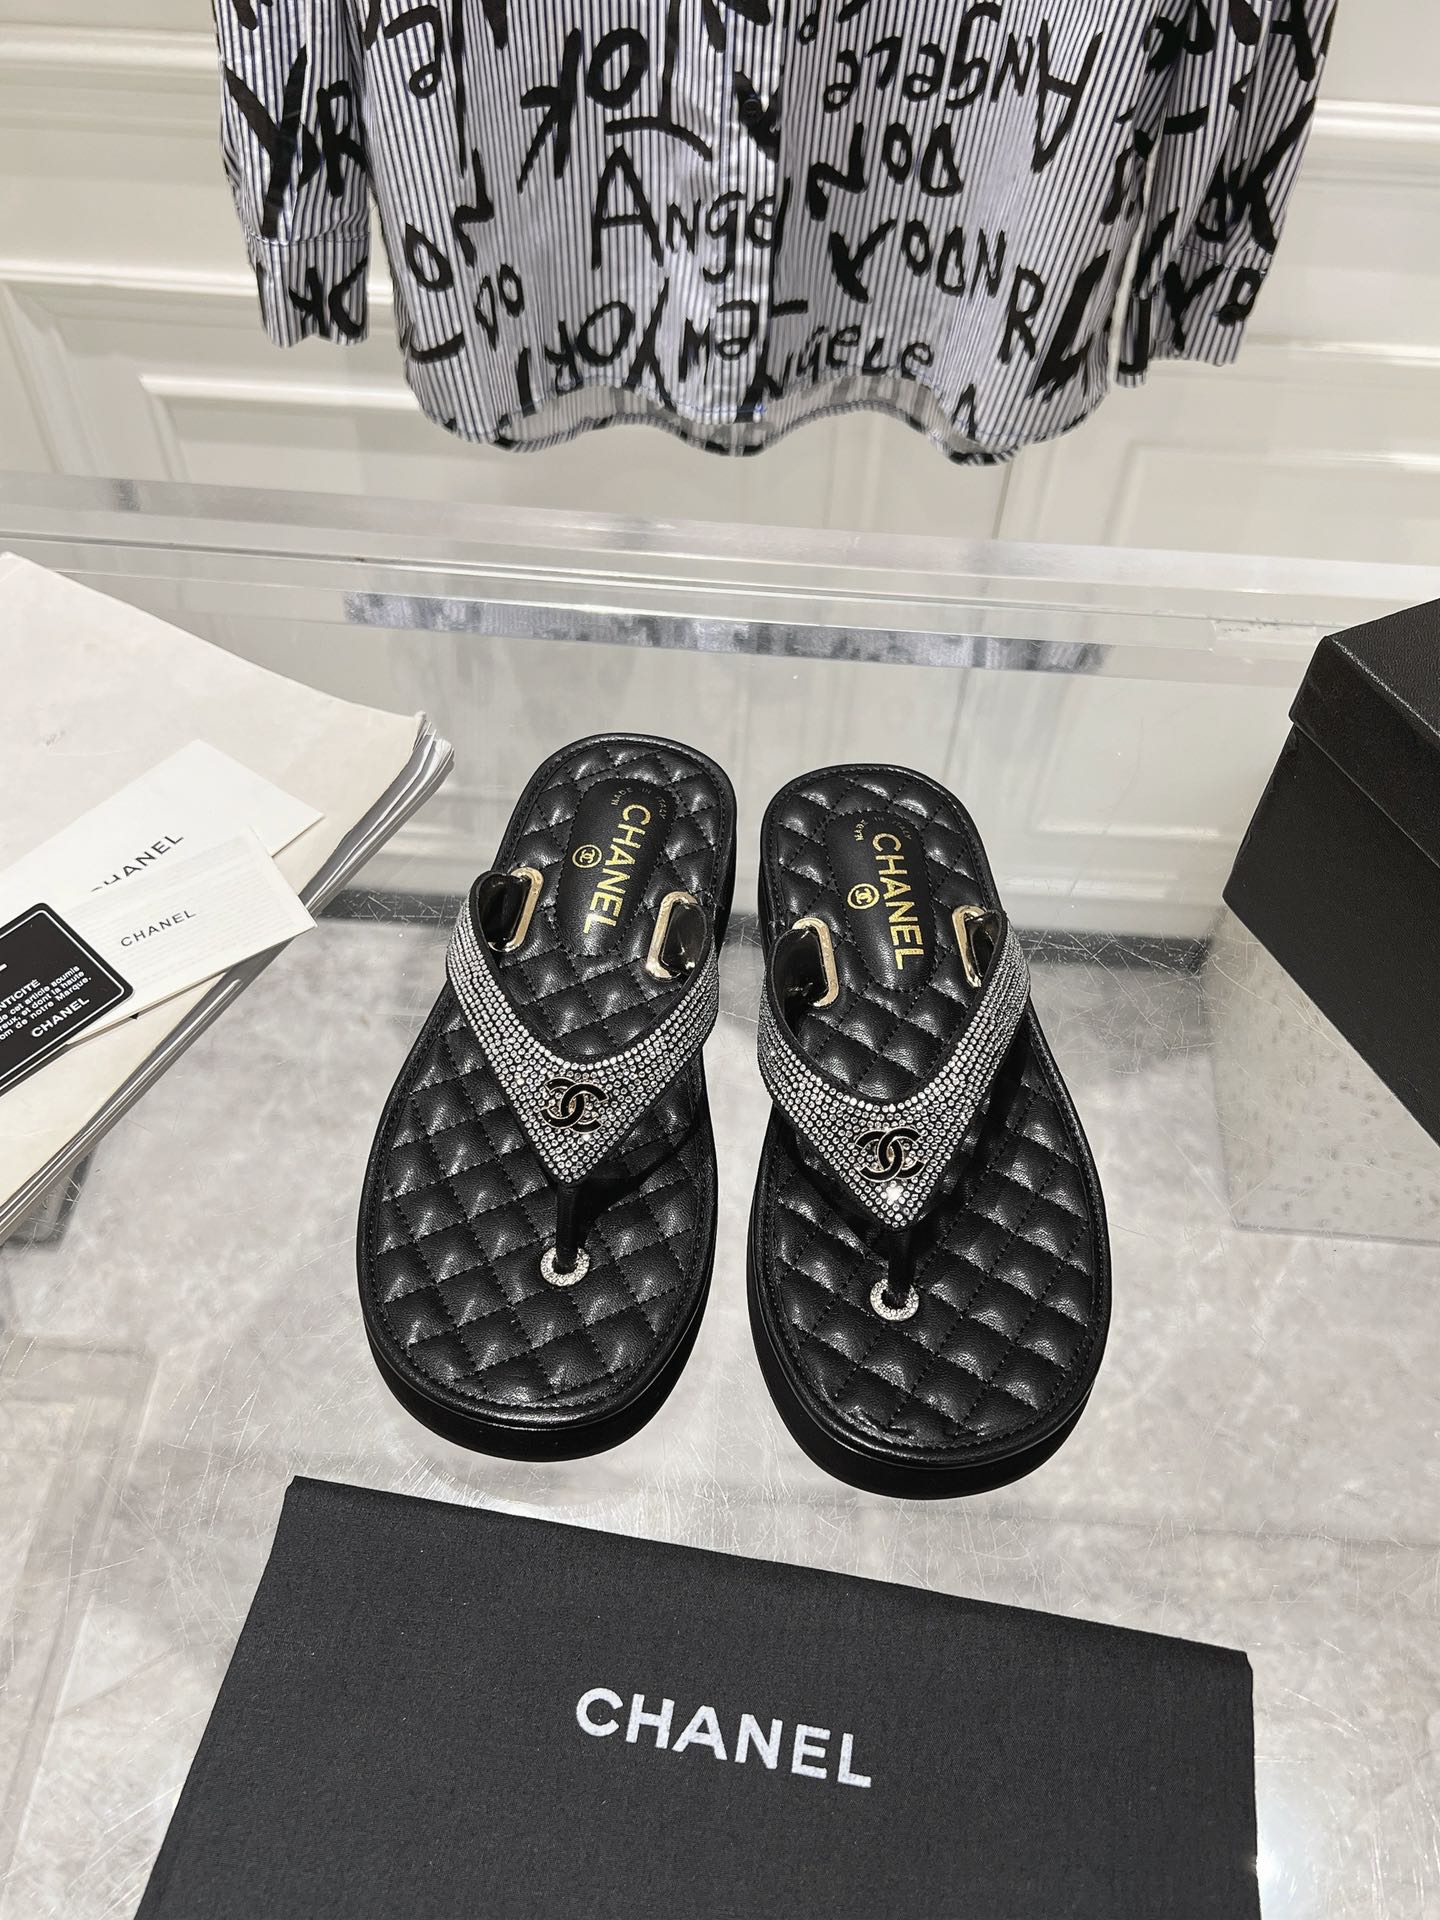 Chanel Shoes Flip Flops Sandals Slippers Cowhide Spring/Summer Collection